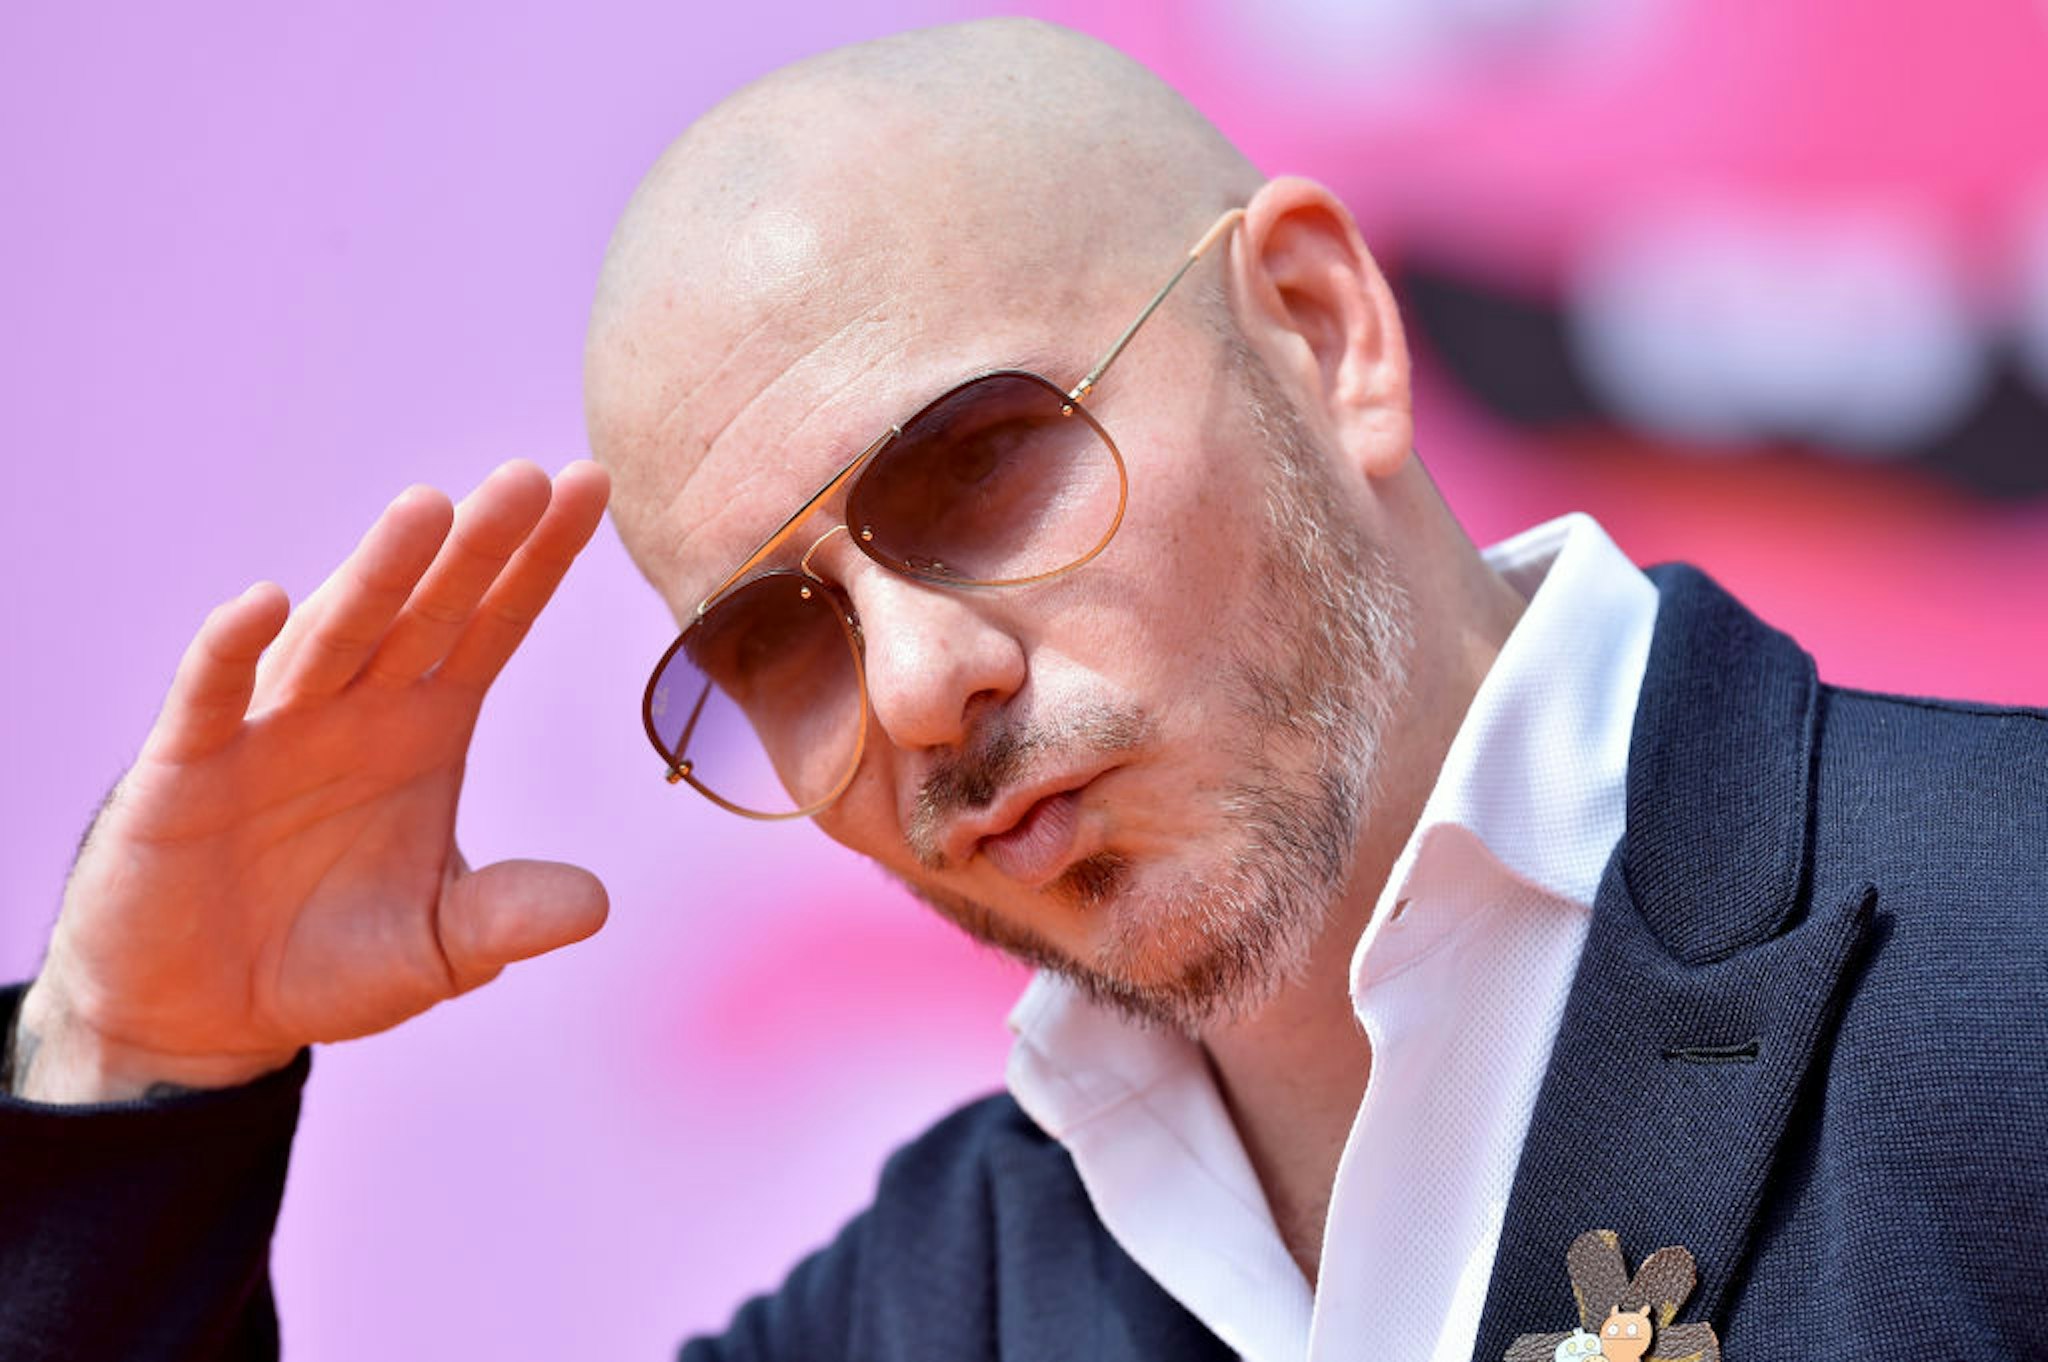 Pitbull attends STX Films World Premiere of "UglyDolls" at Regal Cinemas L.A. Live on April 27, 2019 in Los Angeles, California.